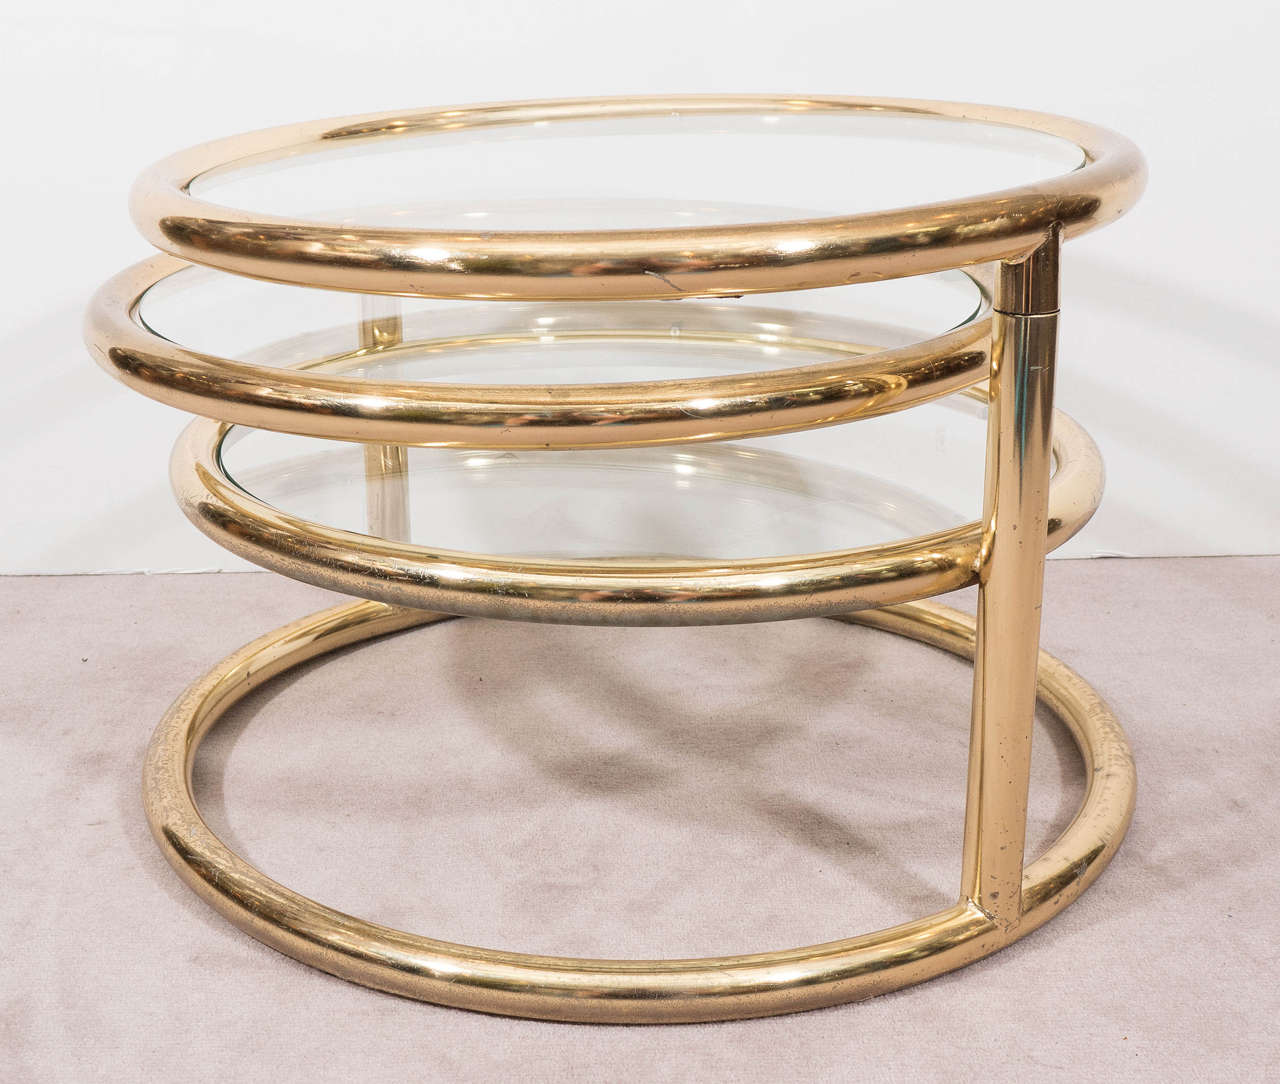 A vintage coffee table, produced, circa 1970s in the style of Milo Baughman, with three-tiered circular polished brass frames, inset with glass tops, above a ring shaped base, two of the table surfaces swivel and extend outwards, the lowest is set